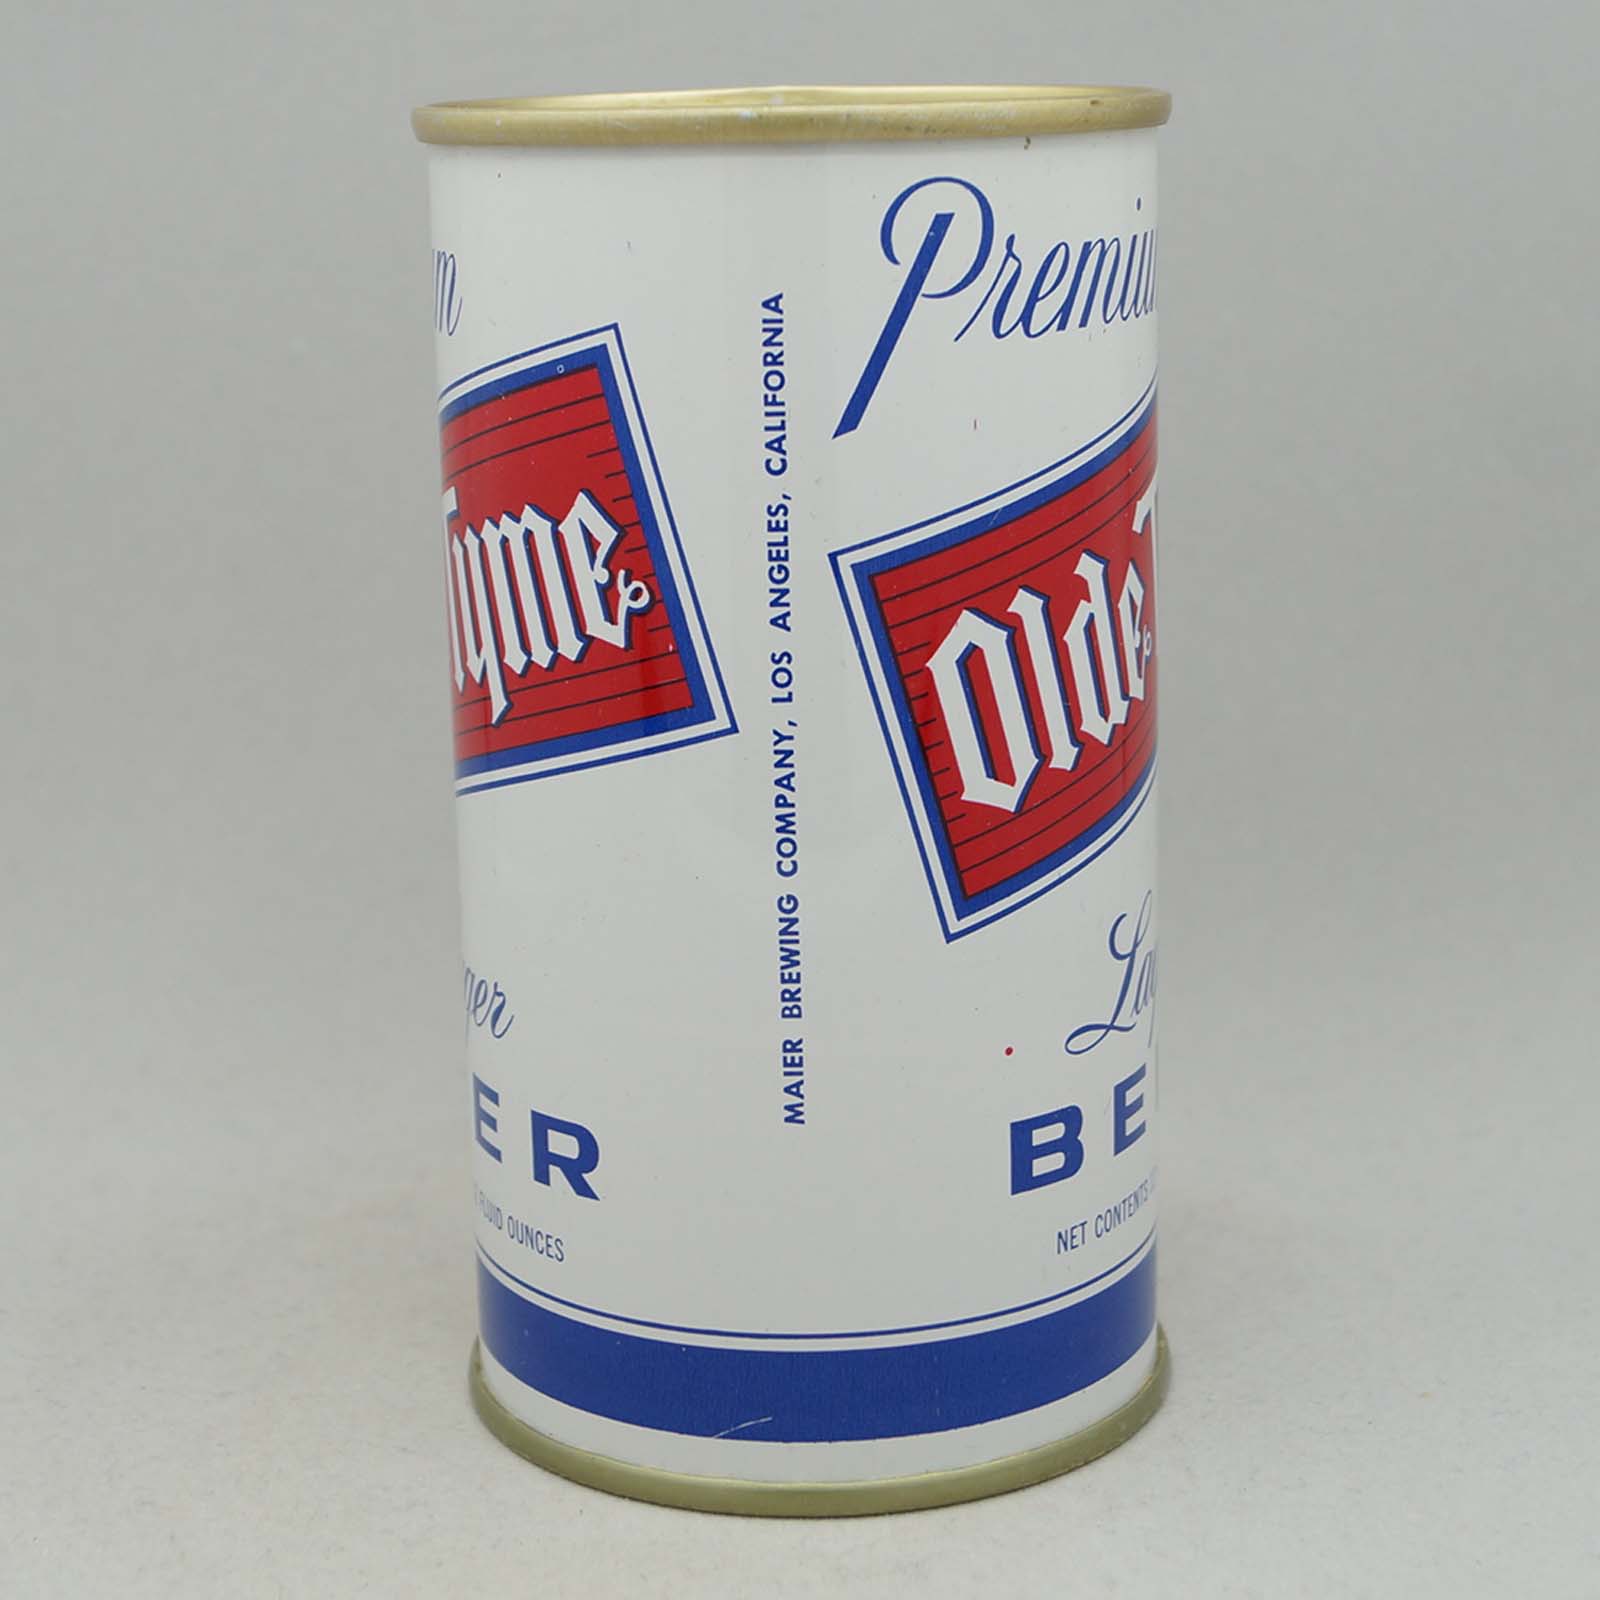 olde tyme 104-9 pull tab beer can 2